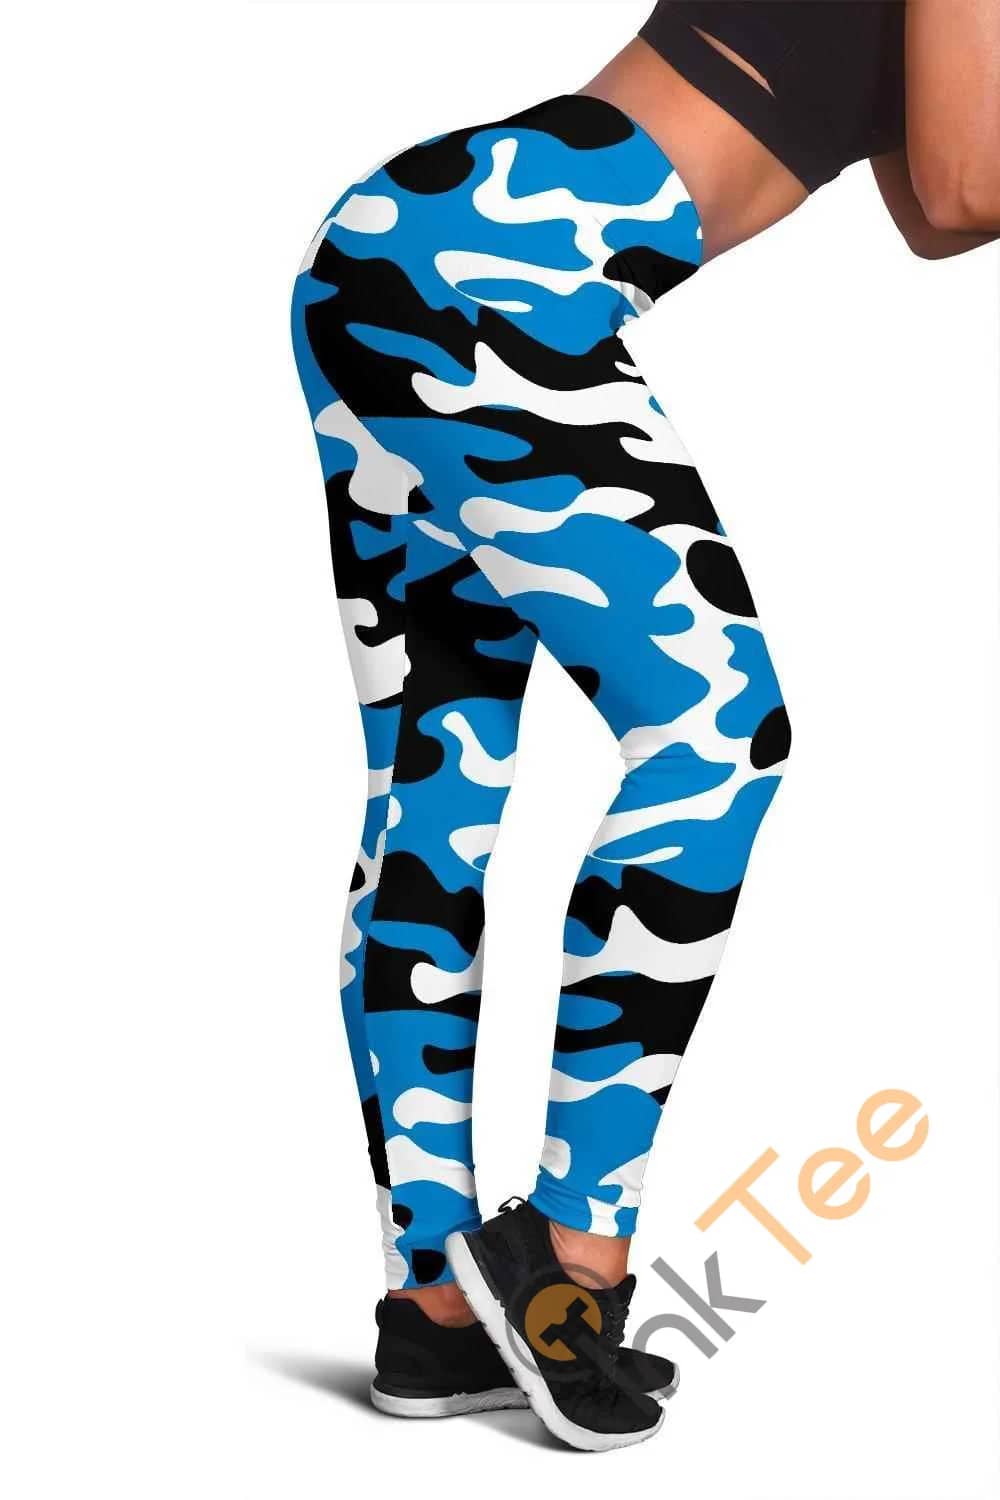 Carolina Panthers Inspired Tru Camo 3D All Over Print For Yoga Fitness Fashion Women'S Leggings